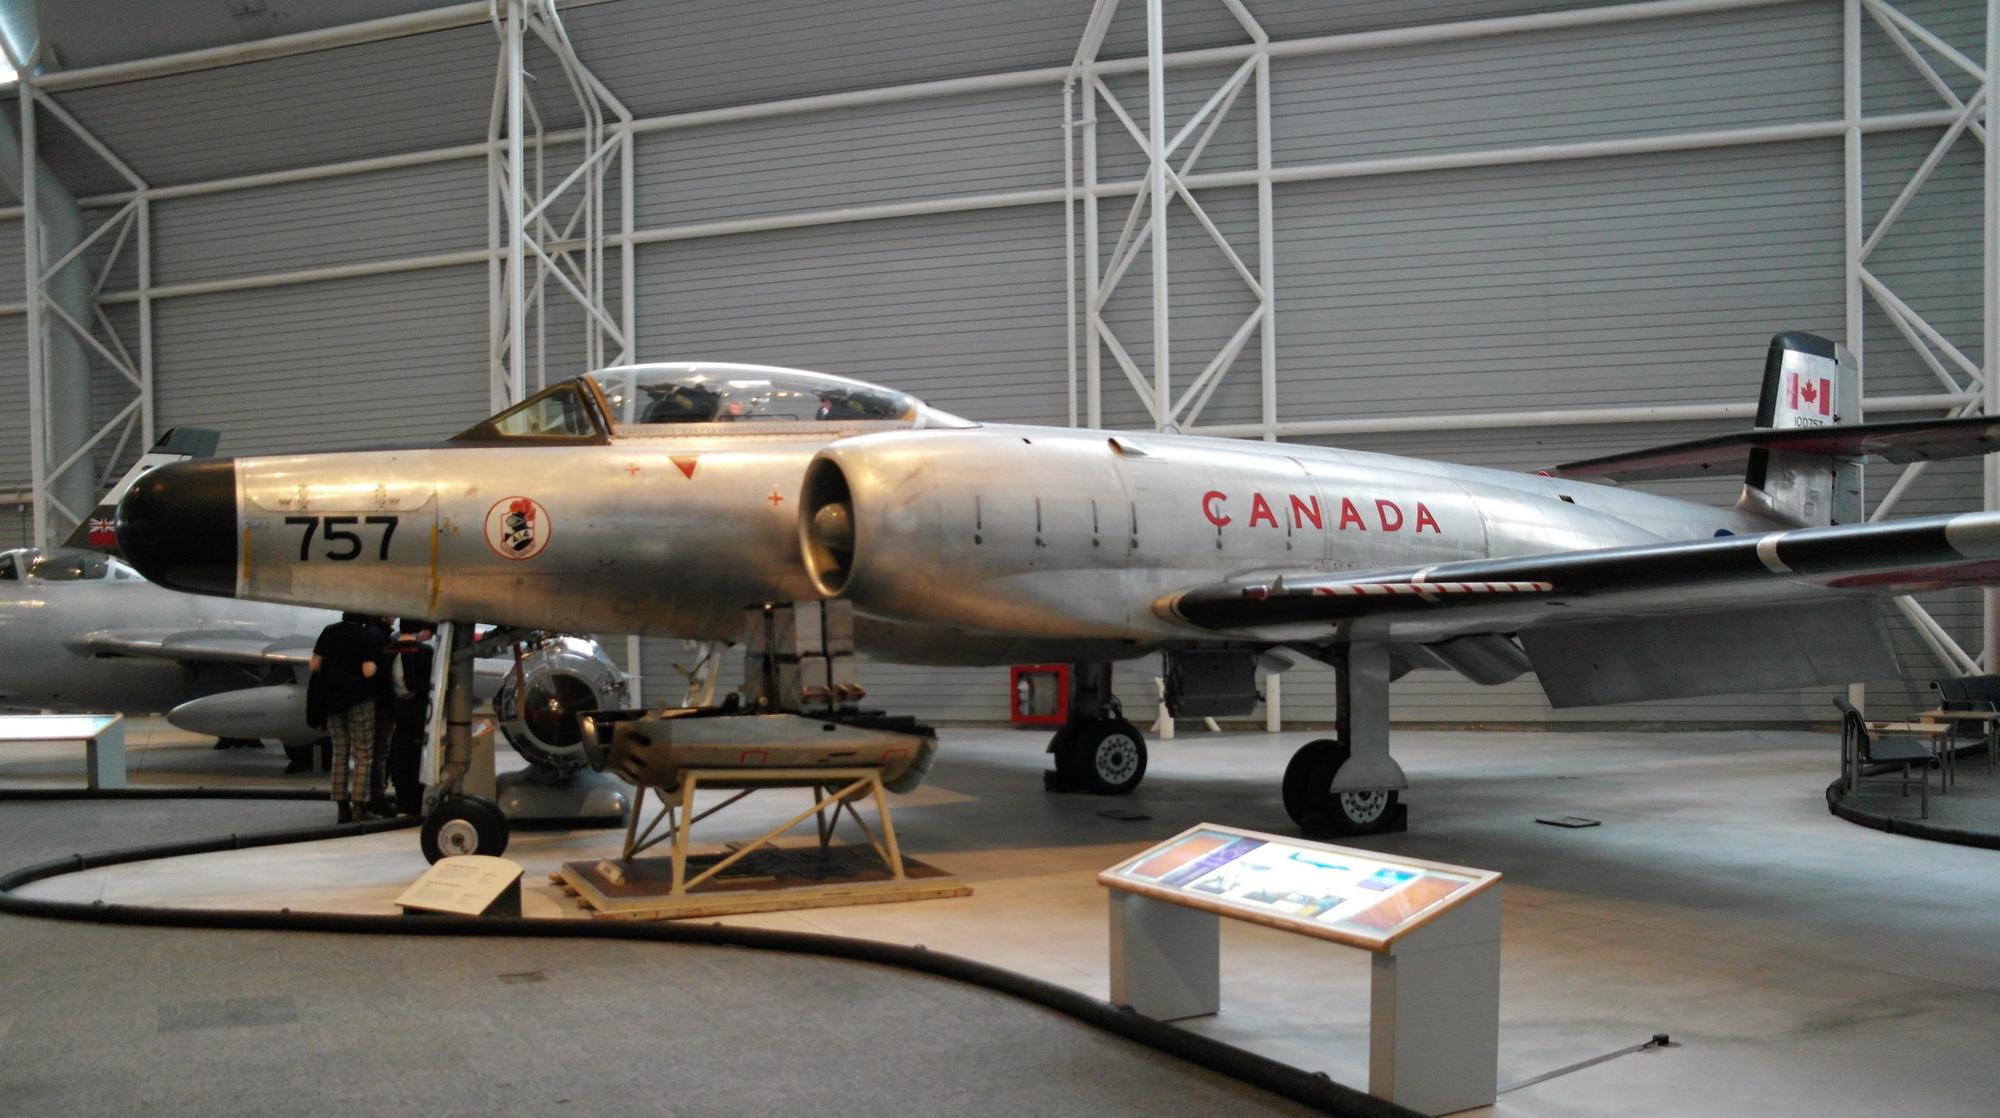 Firefall: The crash of 18367 – Cold War exercise resulted in tragic CF-100 crash into Orleans convent